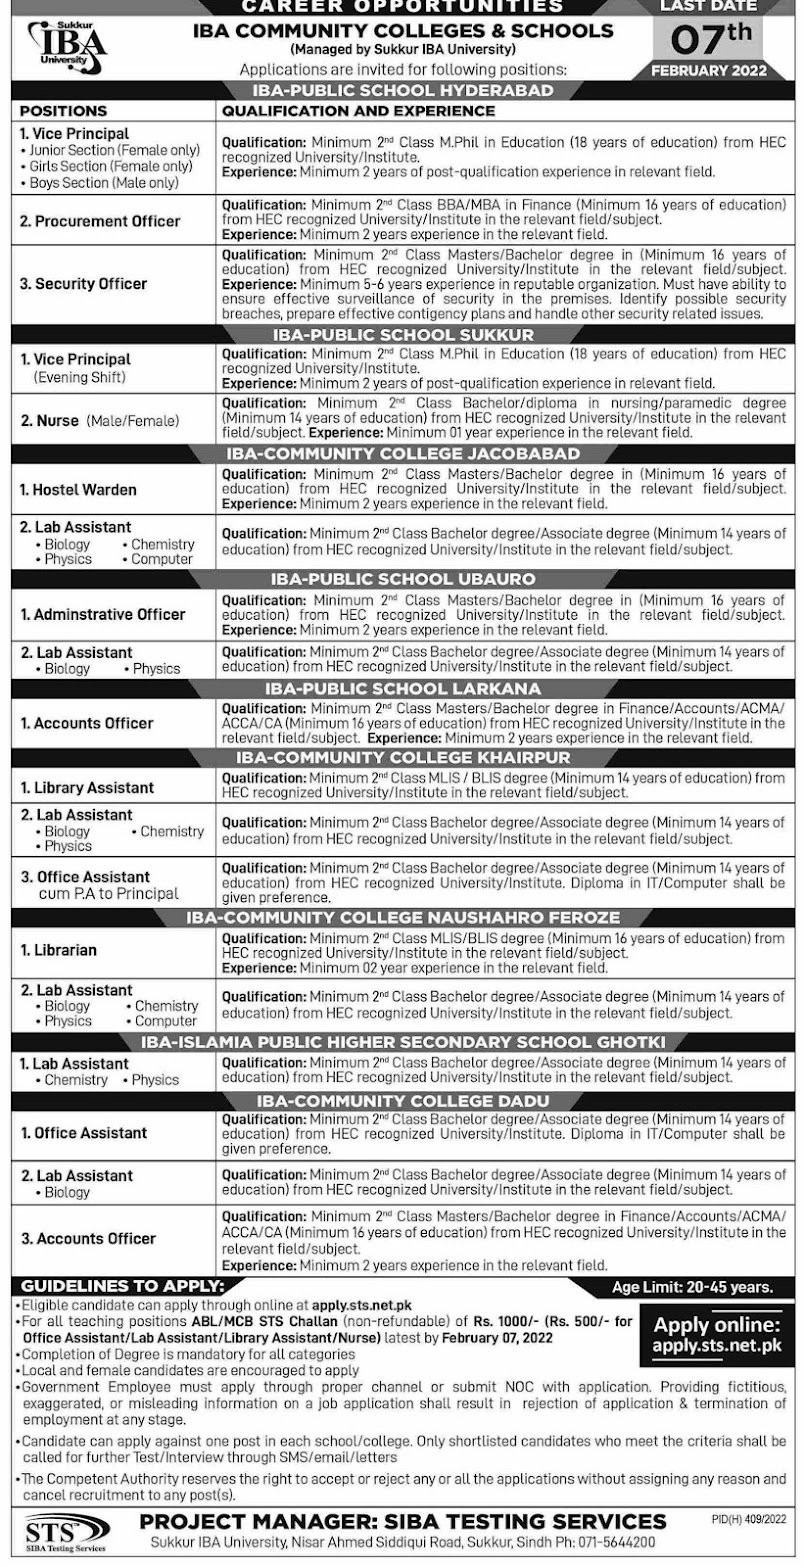 IBA Schools and Community Colleges Jobs 2022